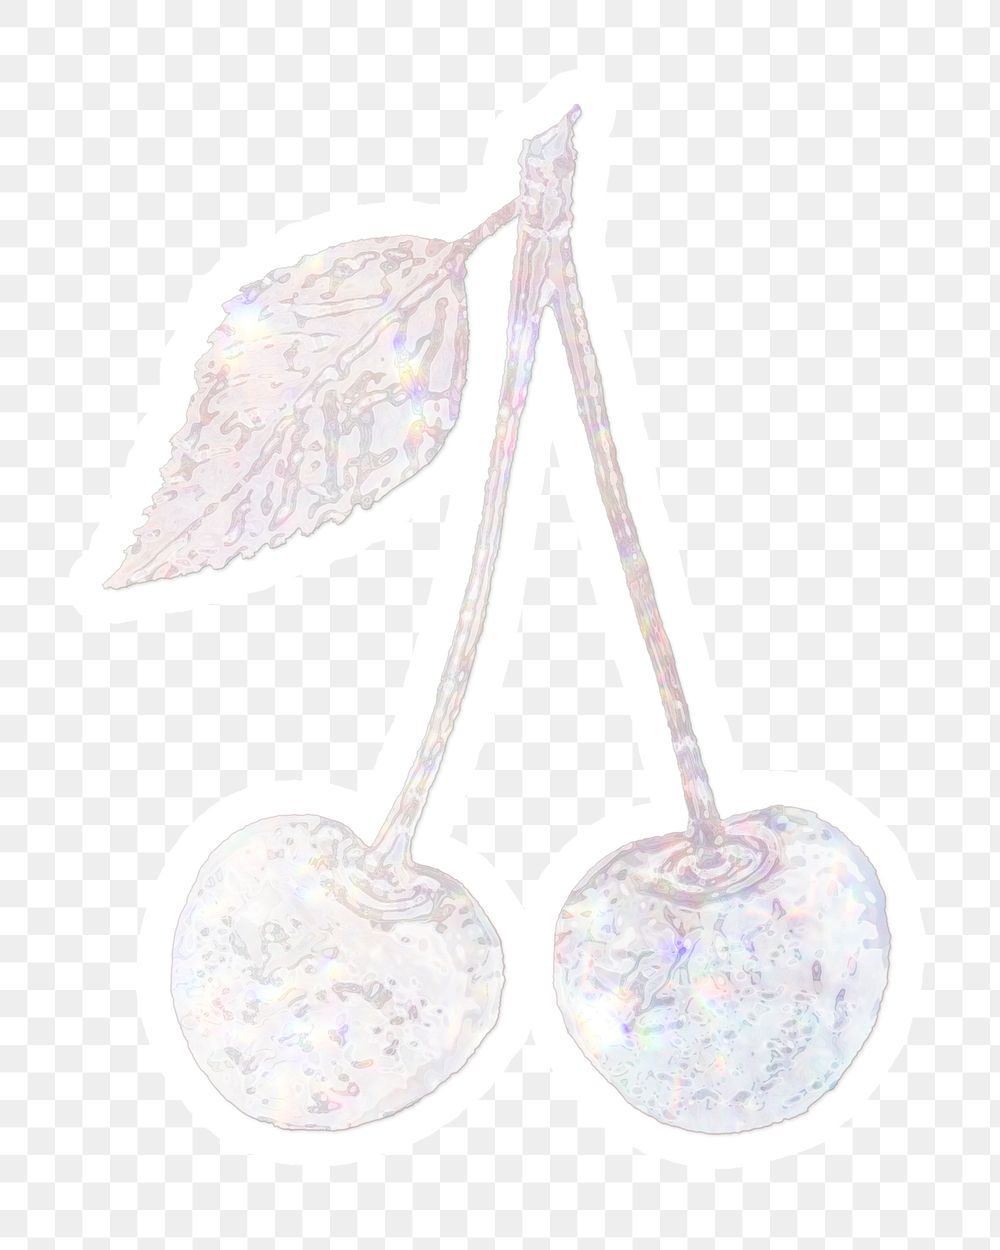 Sparkling silver cherry holographic style sticker design element with white border